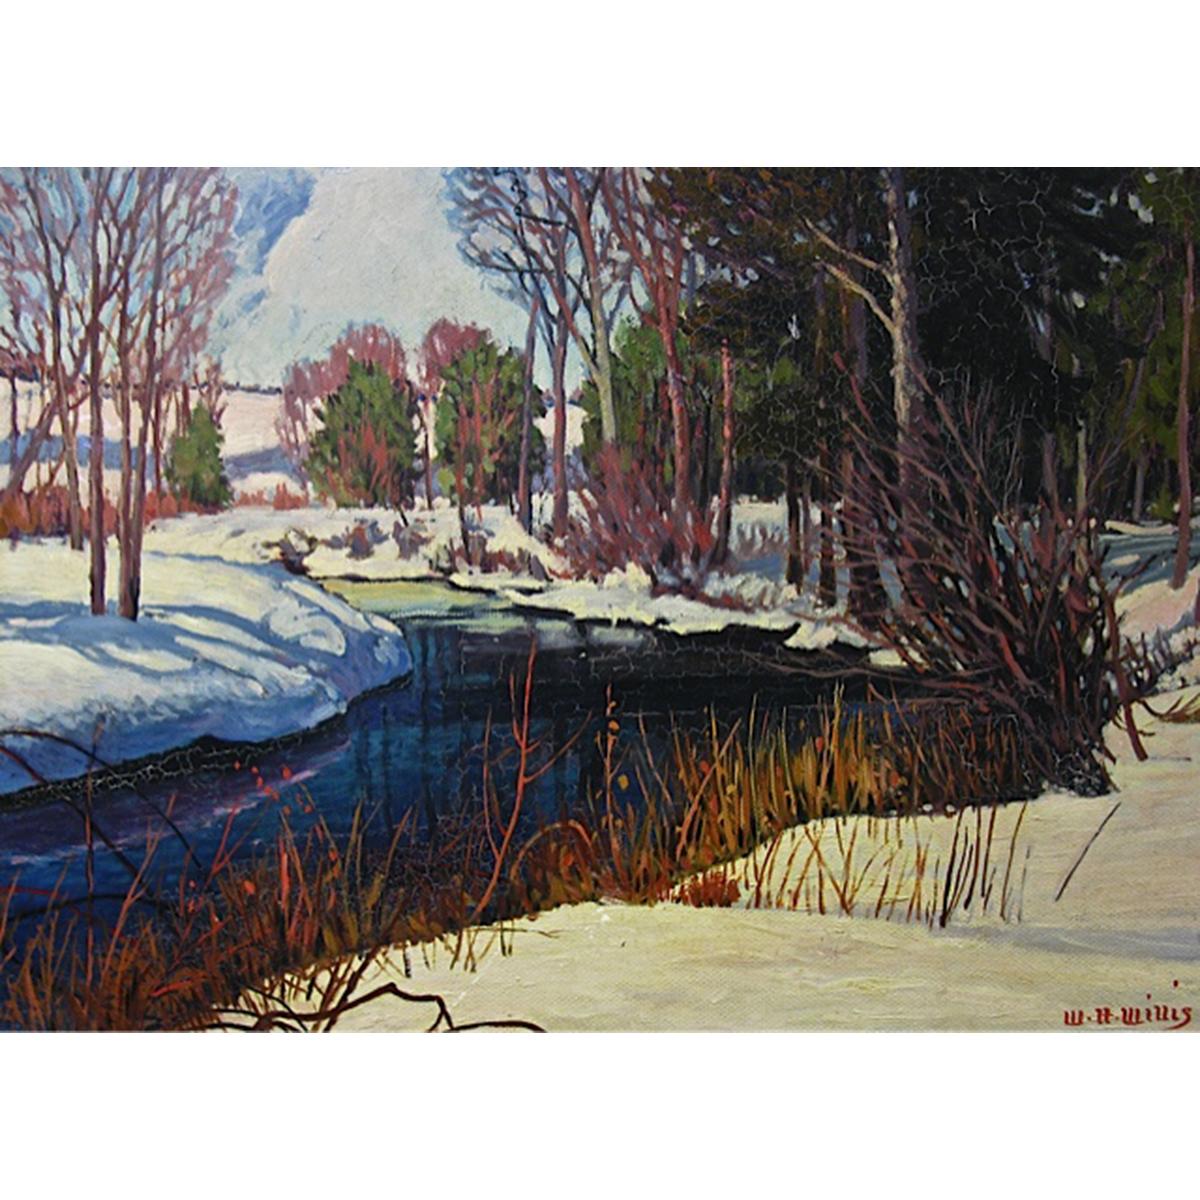 WILLIAM HARRY WILLIS (CANADIAN, 20TH CENTURY) WINTER CREEK STUDY  OIL ON BOARD; SIGNED LOWER RIGHT (Cond. noted)  19.5” x 29.5”